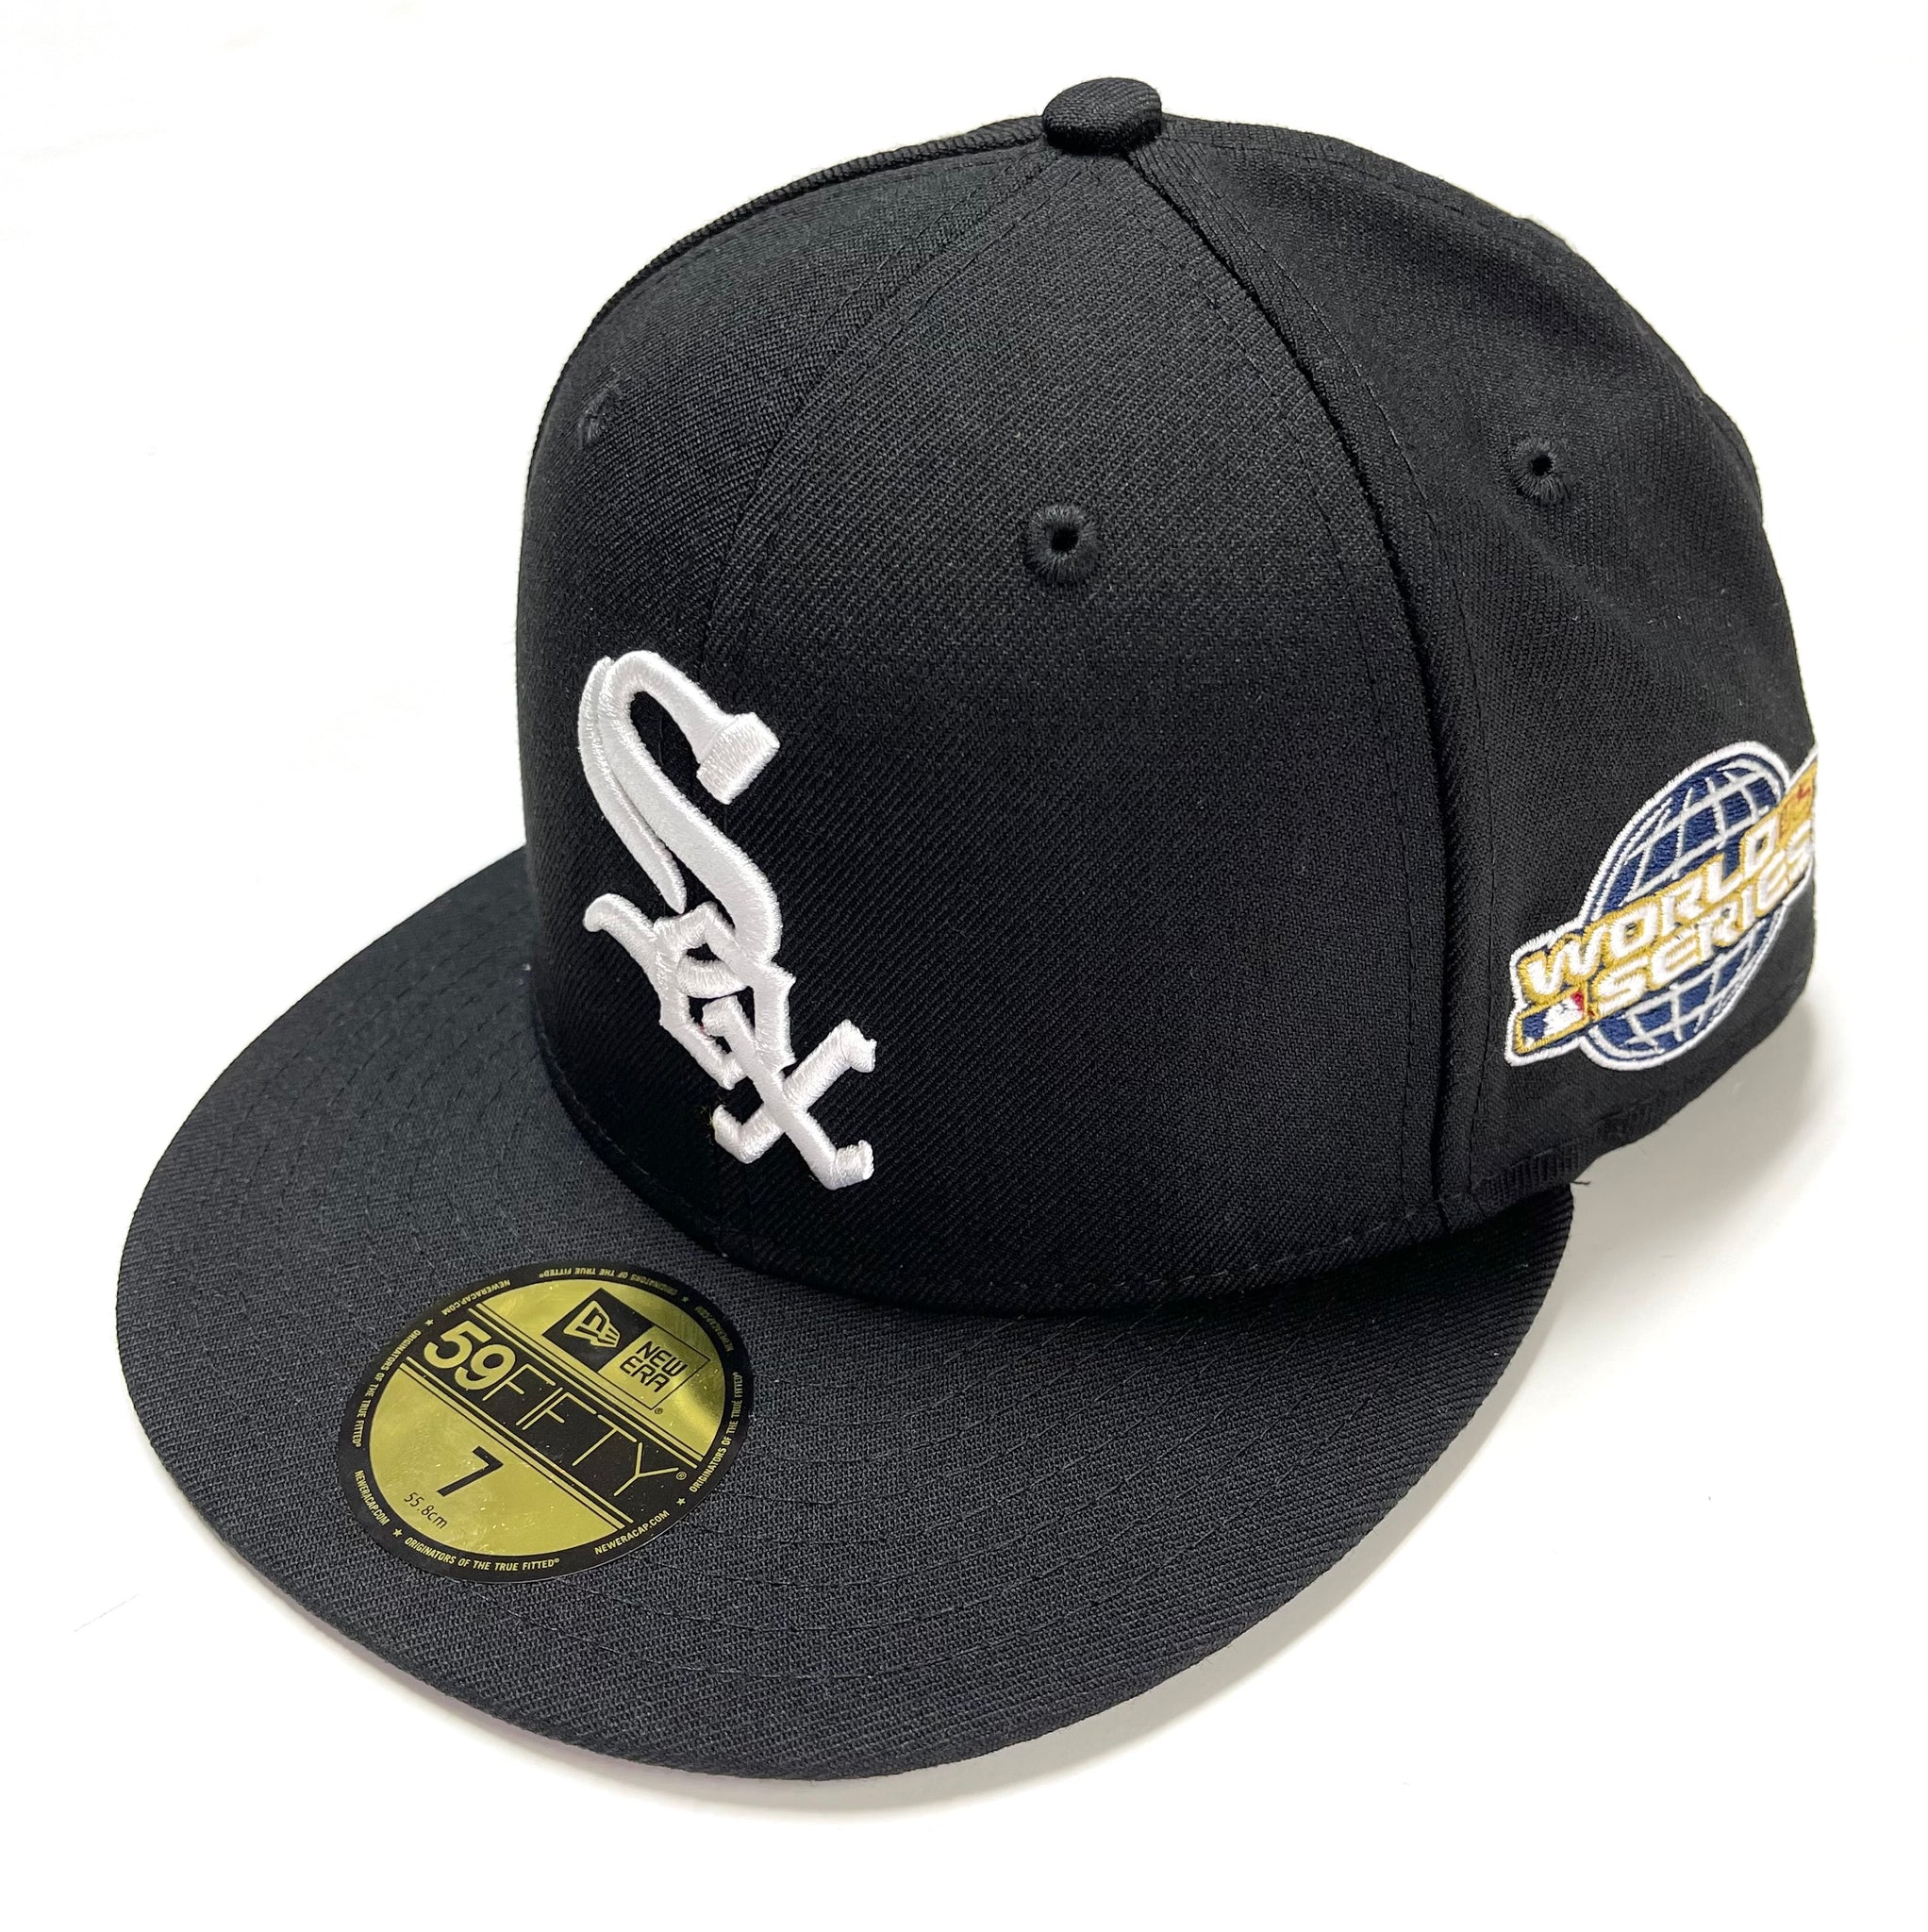 NEW ERA 2005 WS SIDE PATCH CHICAGO WHITE SOX FITTED HAT (BLACK